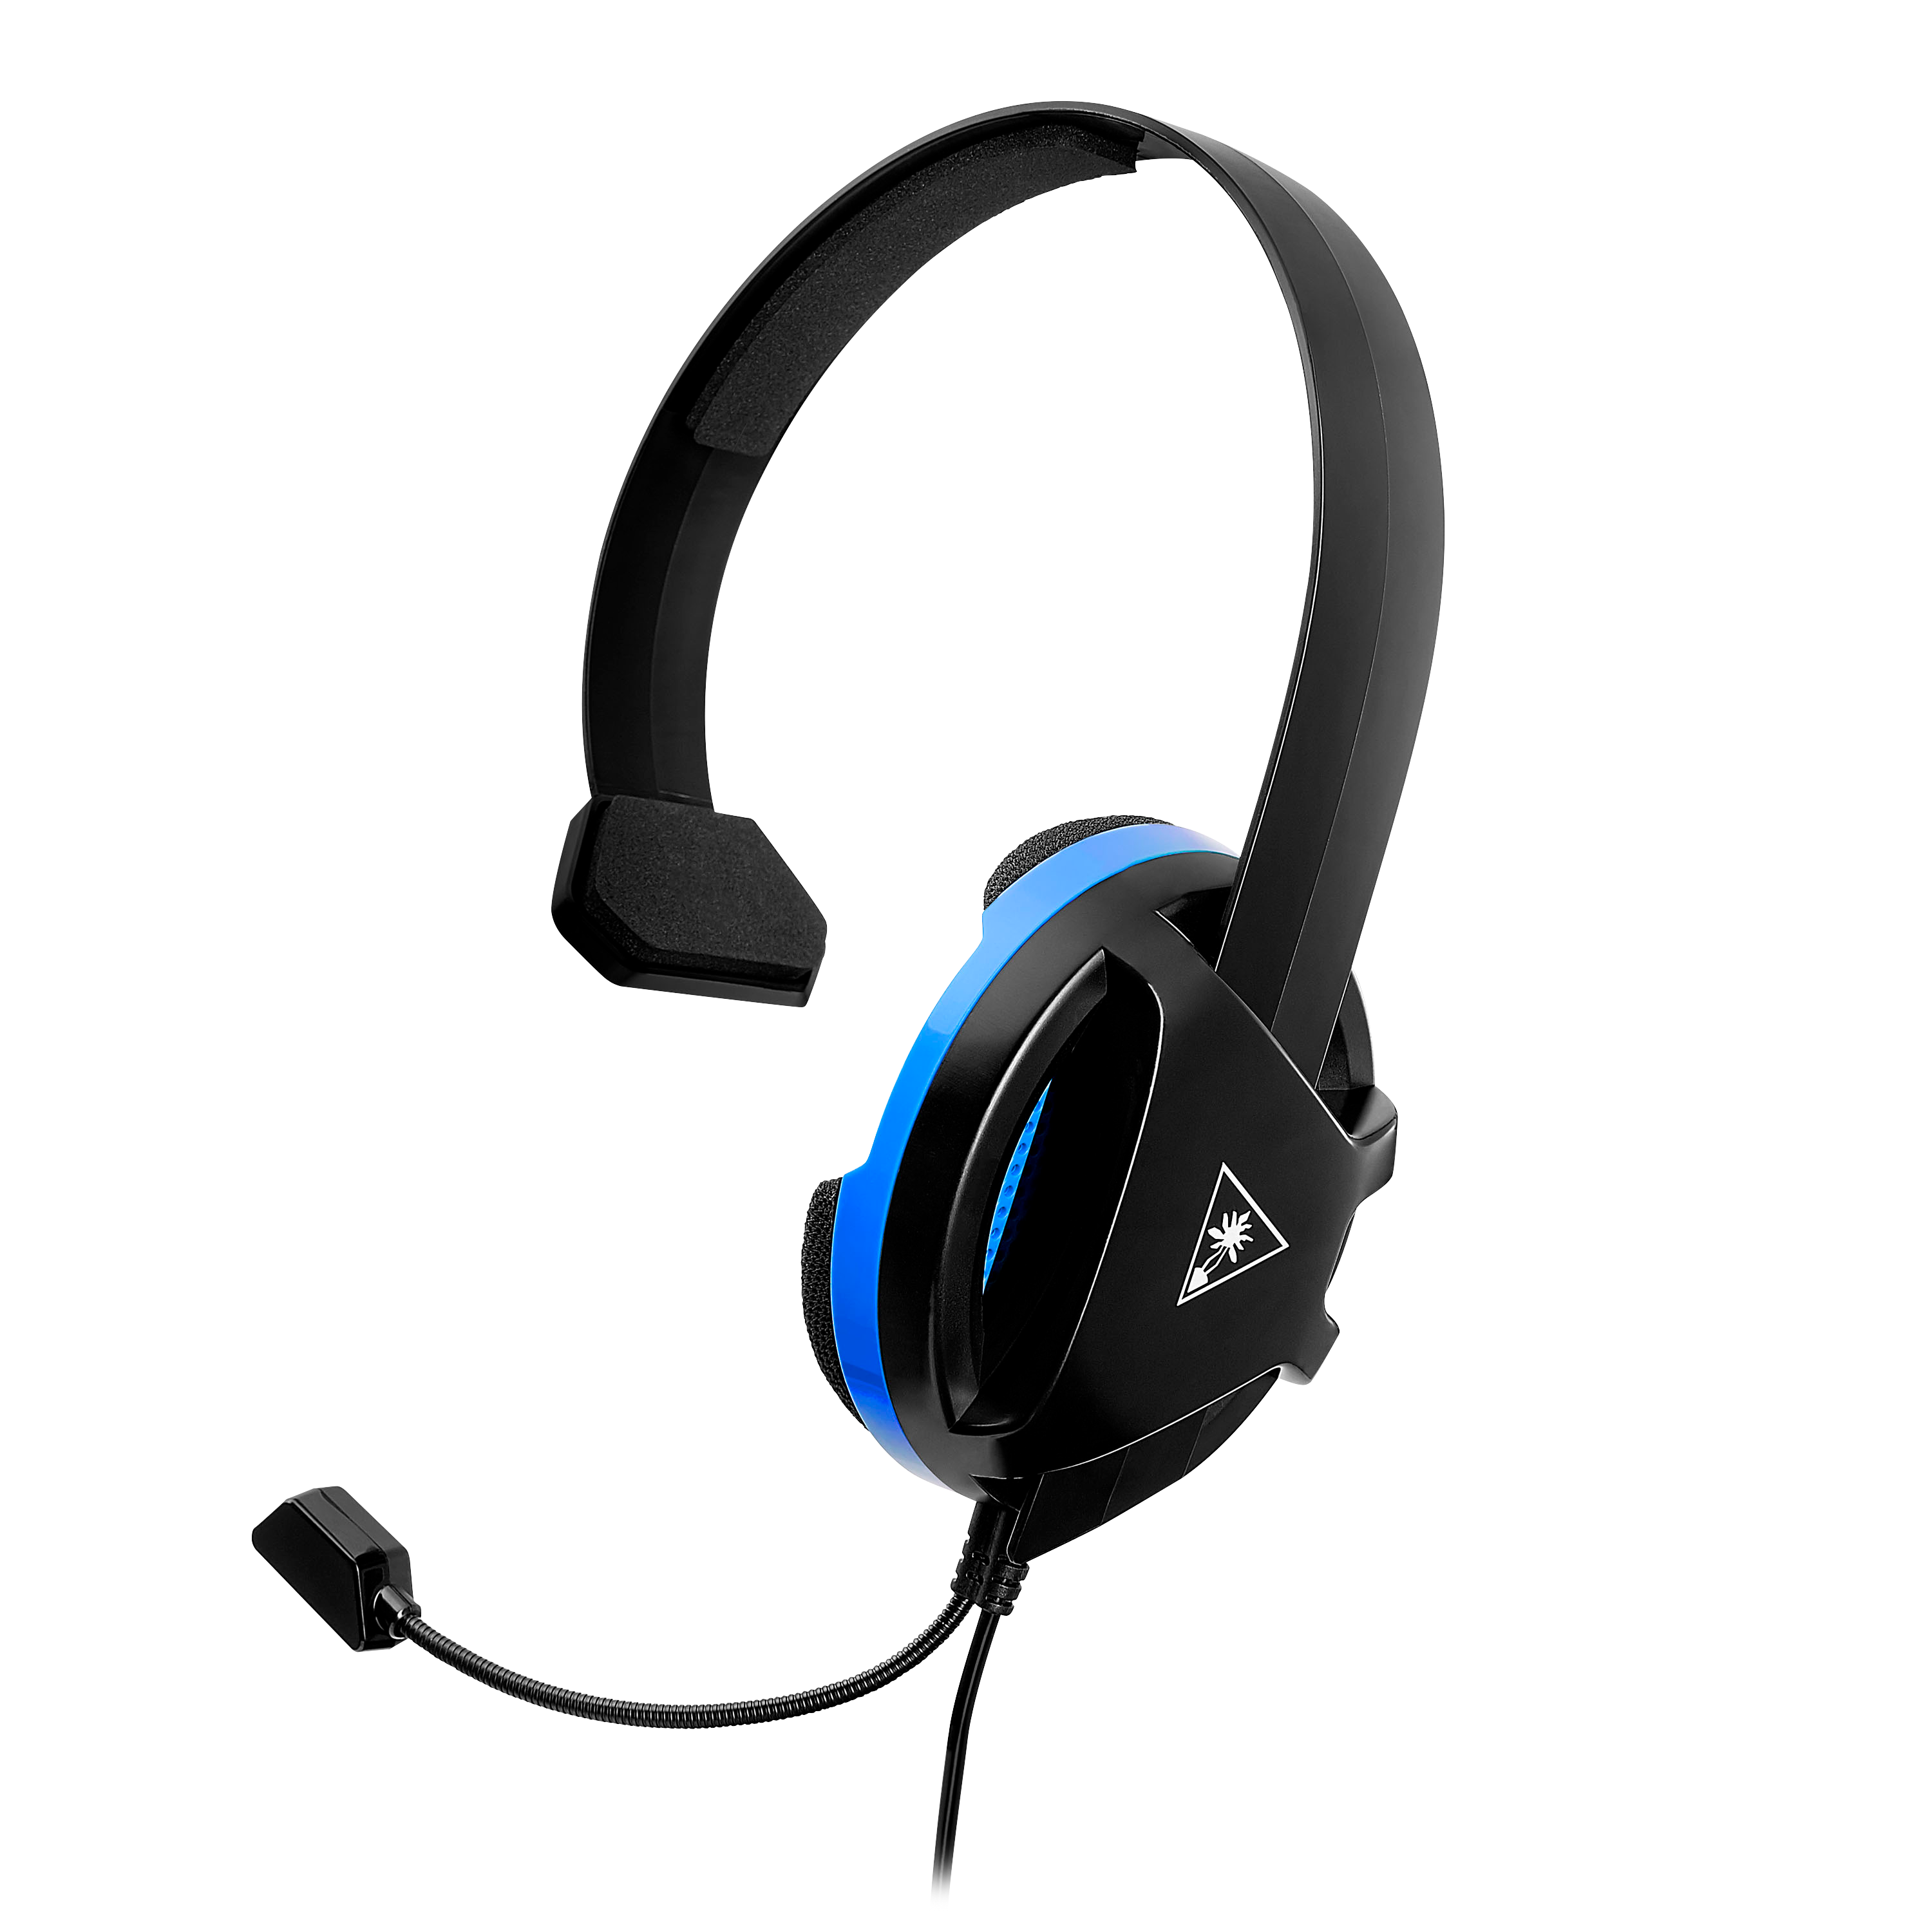 ps4 headset all audio no chat